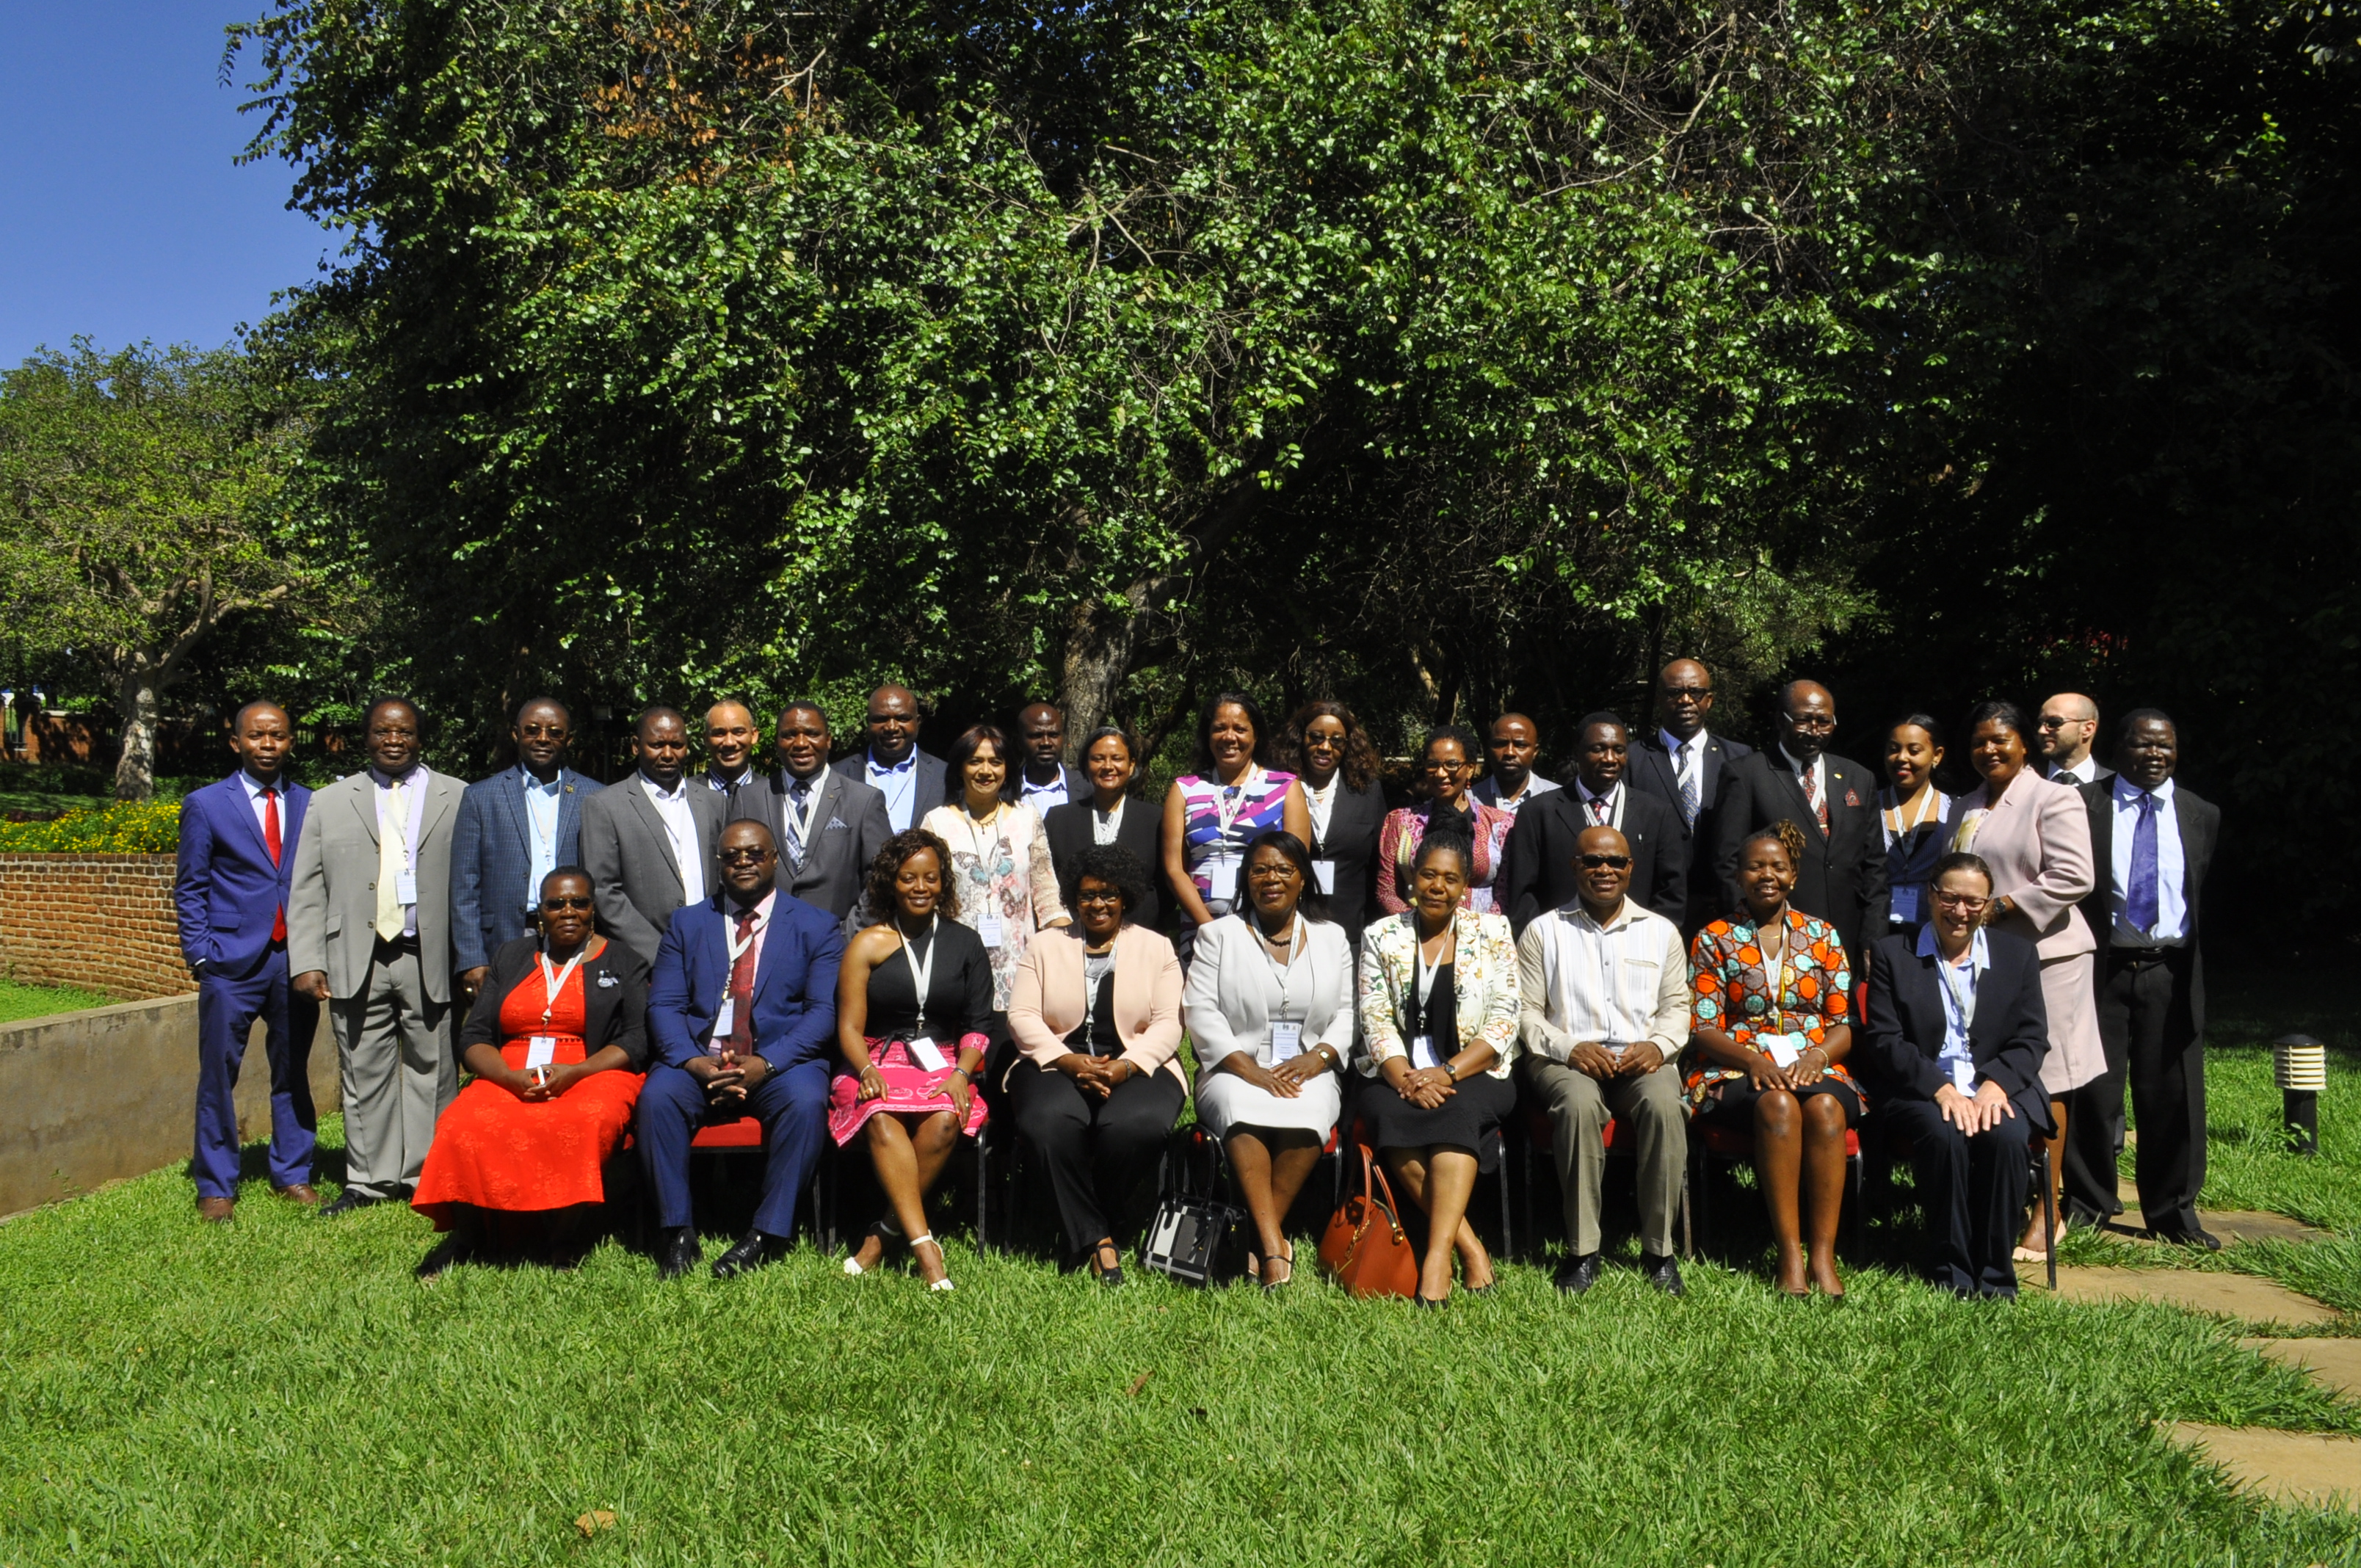 Group photograph of the New Commissioners' Orientation participants. Photo credit: Chris Sekani (HAAG Photo Graphics)